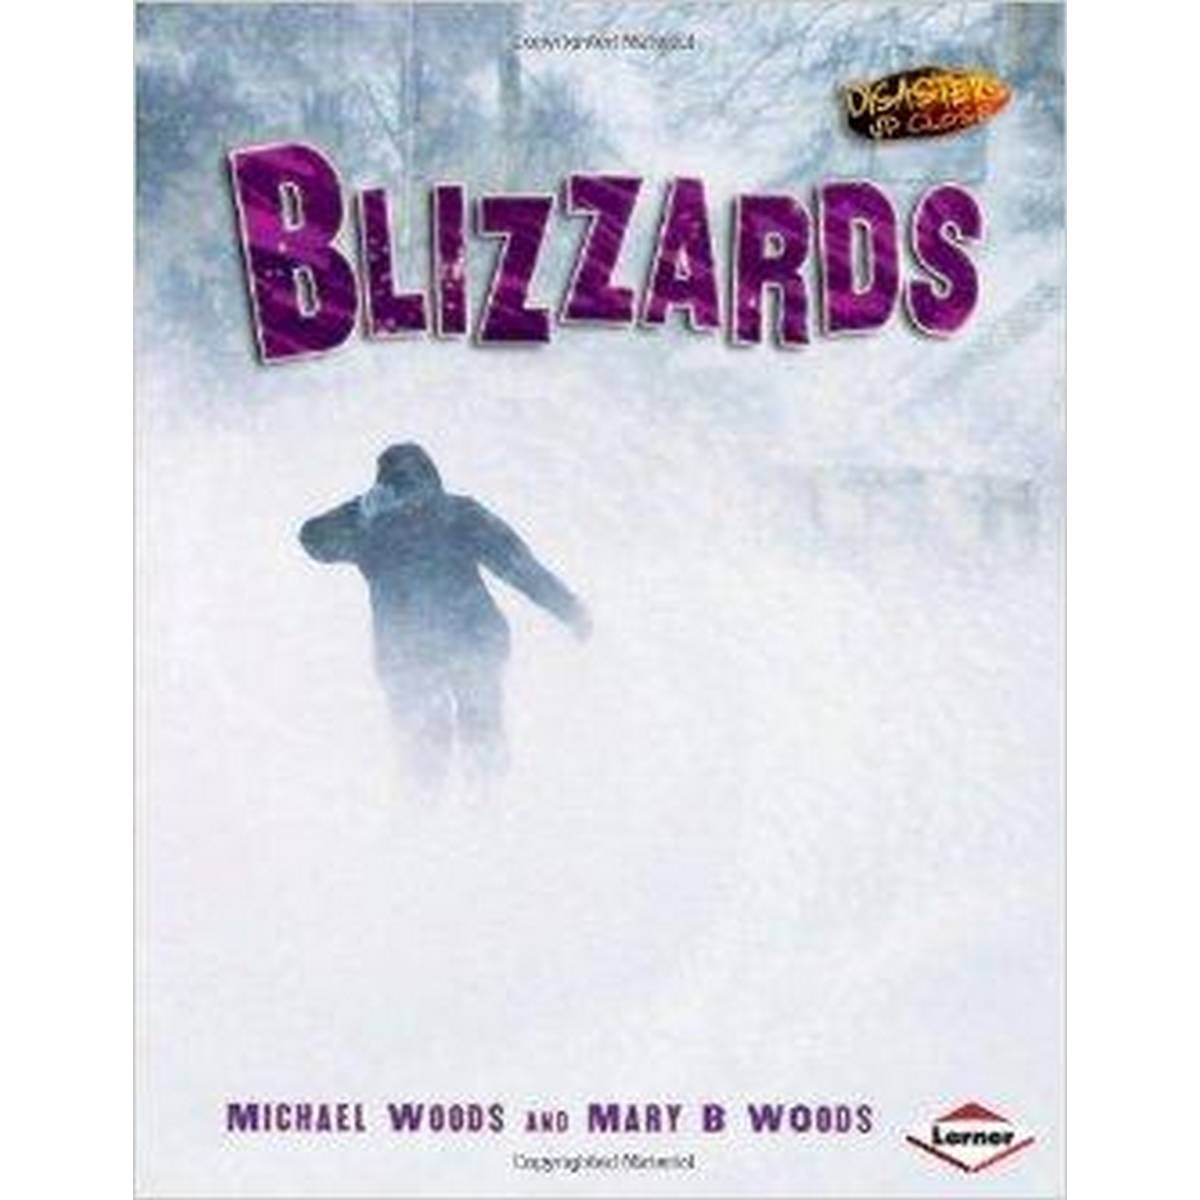 Disasters Up Close: Blizzards